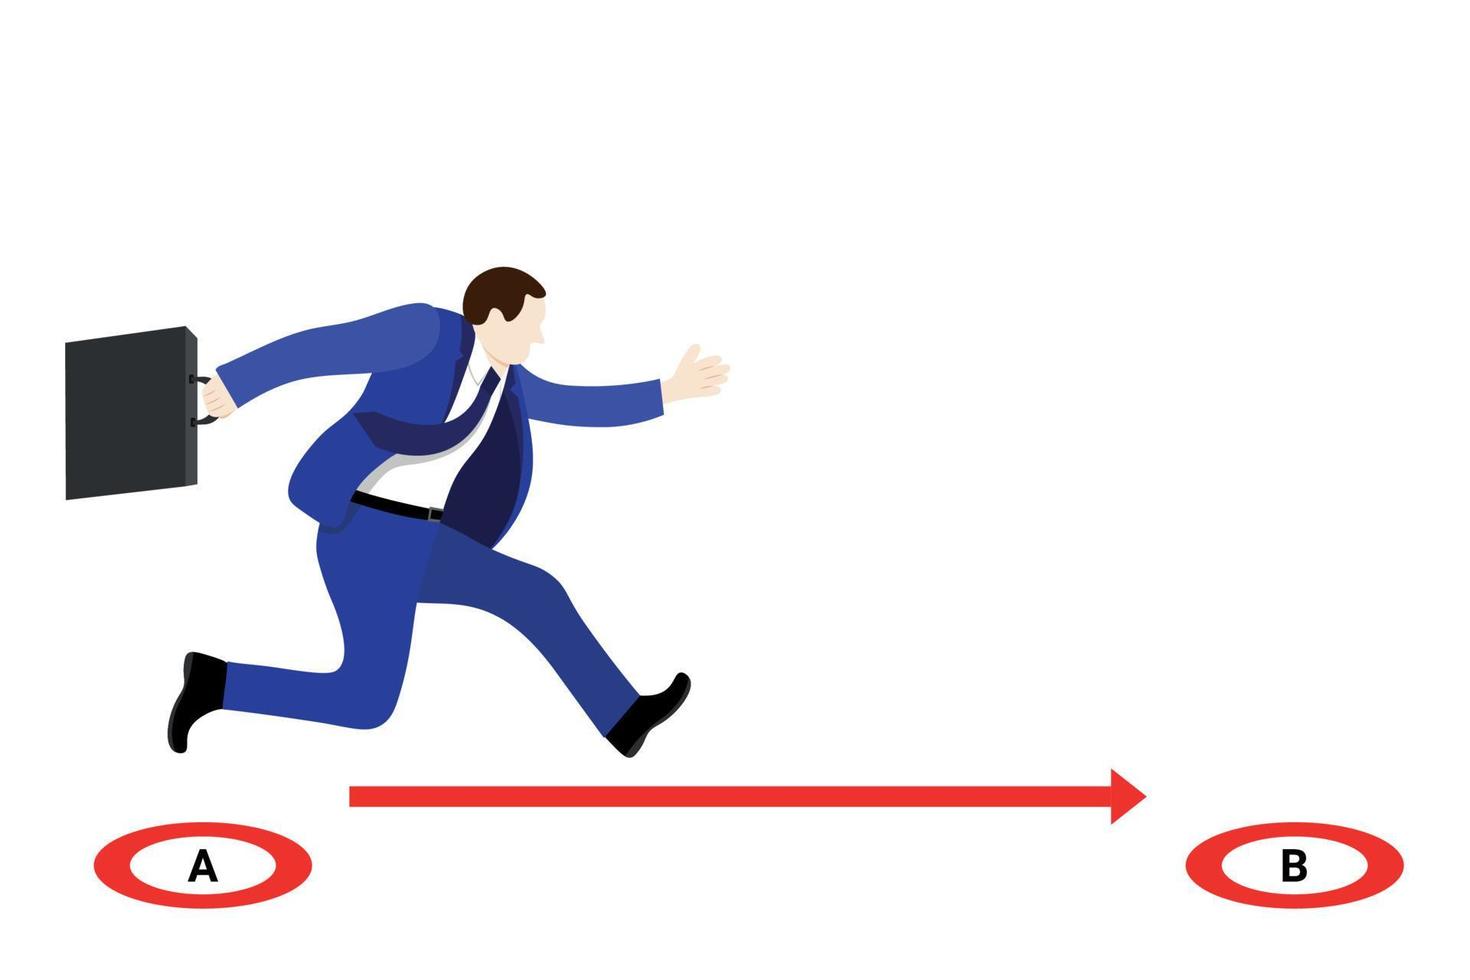 A man in a blue business suit with a briefcase runs from point A to point B, isolate on white, flat vector